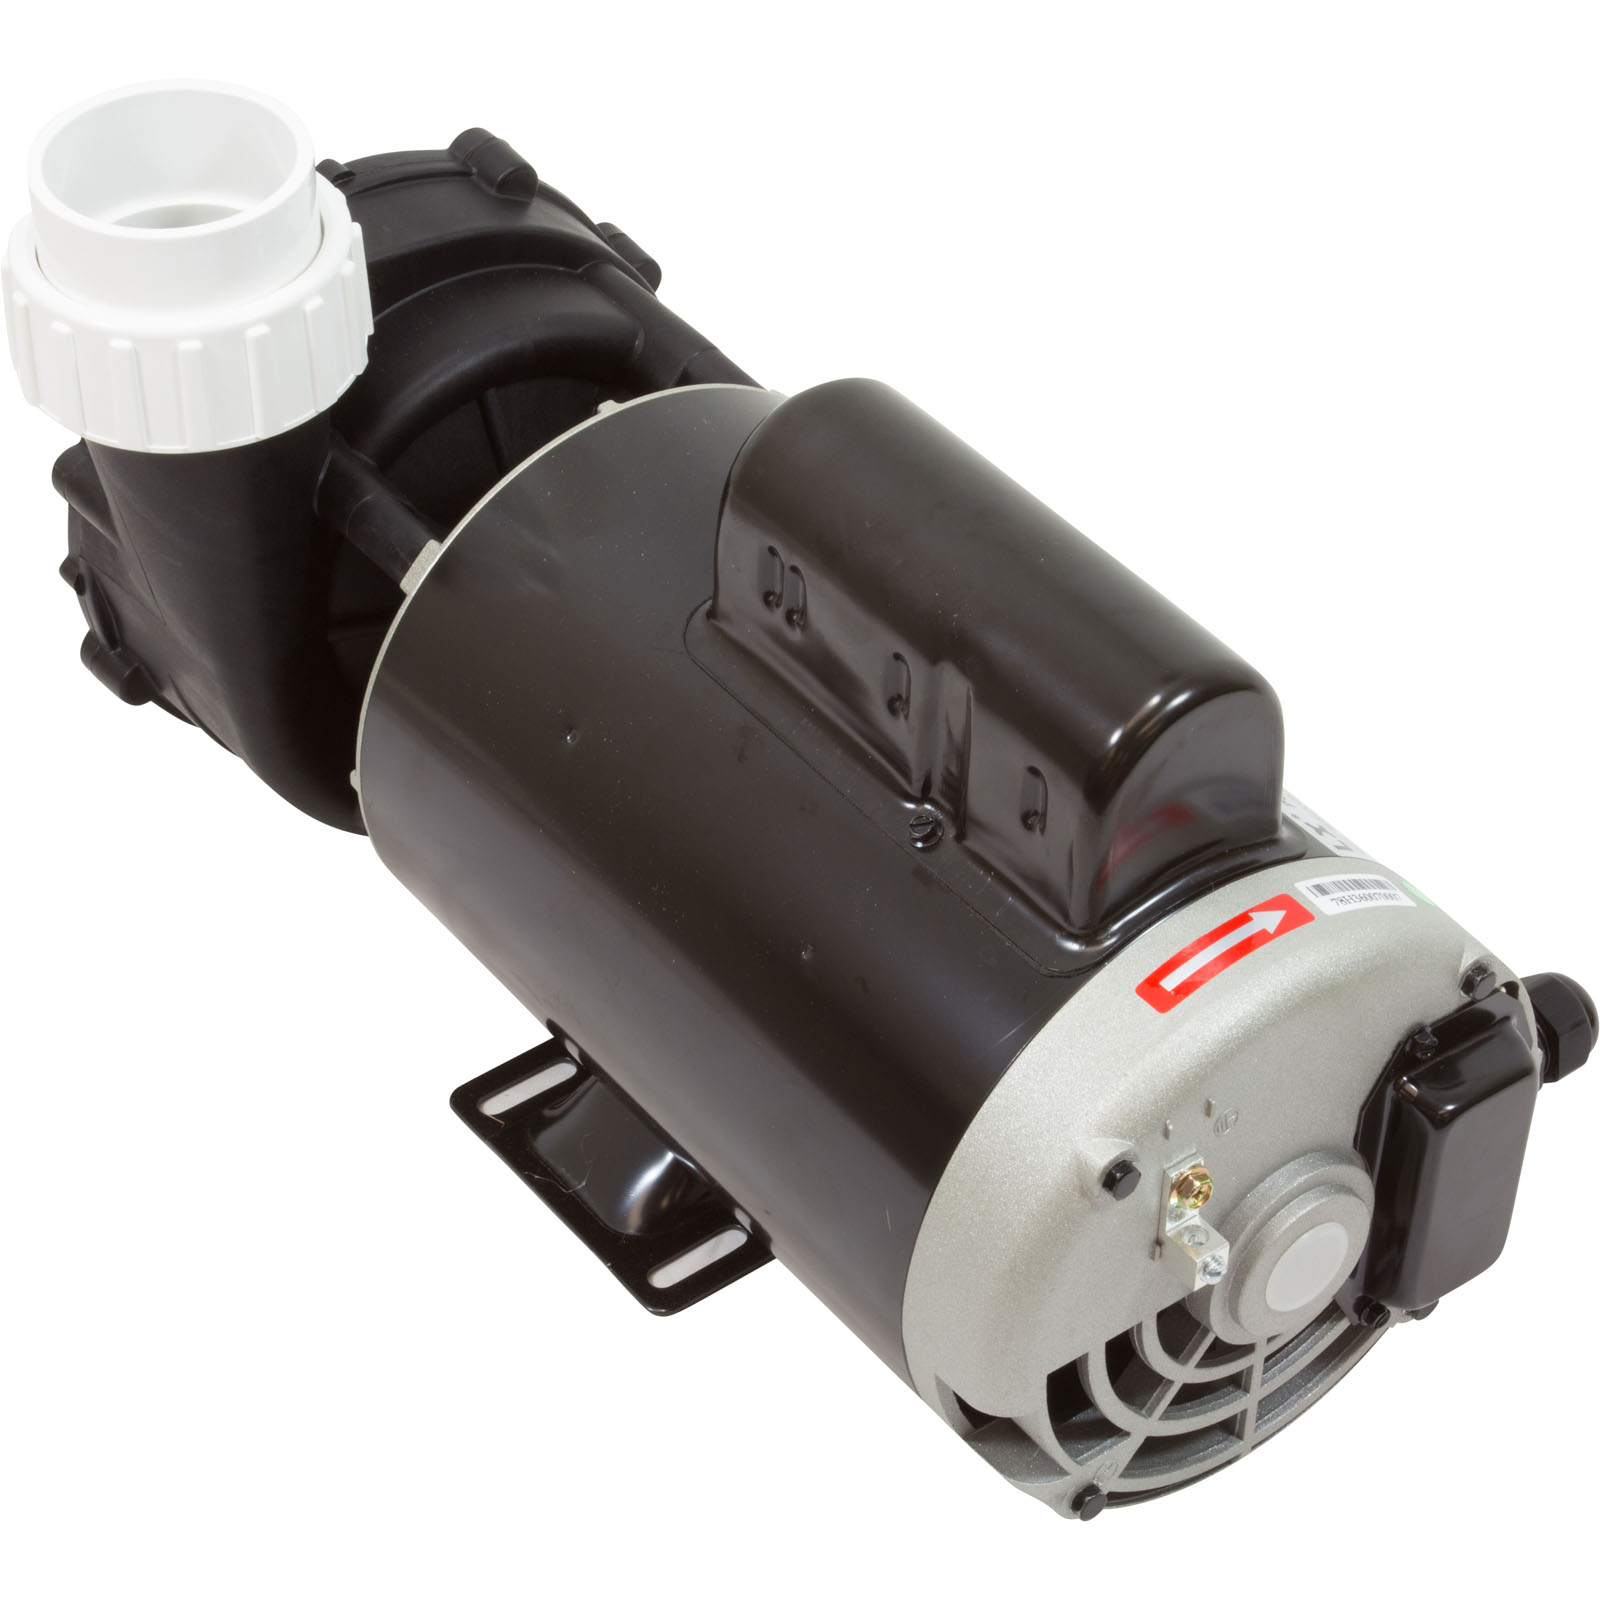 Picture of 56WUA300-II  Pump LX 56WUA 3.0hp 230v 2-Spd 56 Frame   2 inch suction  This model LX pump is commonly used to replace Aqua Flo XP2e, 3.0 HP